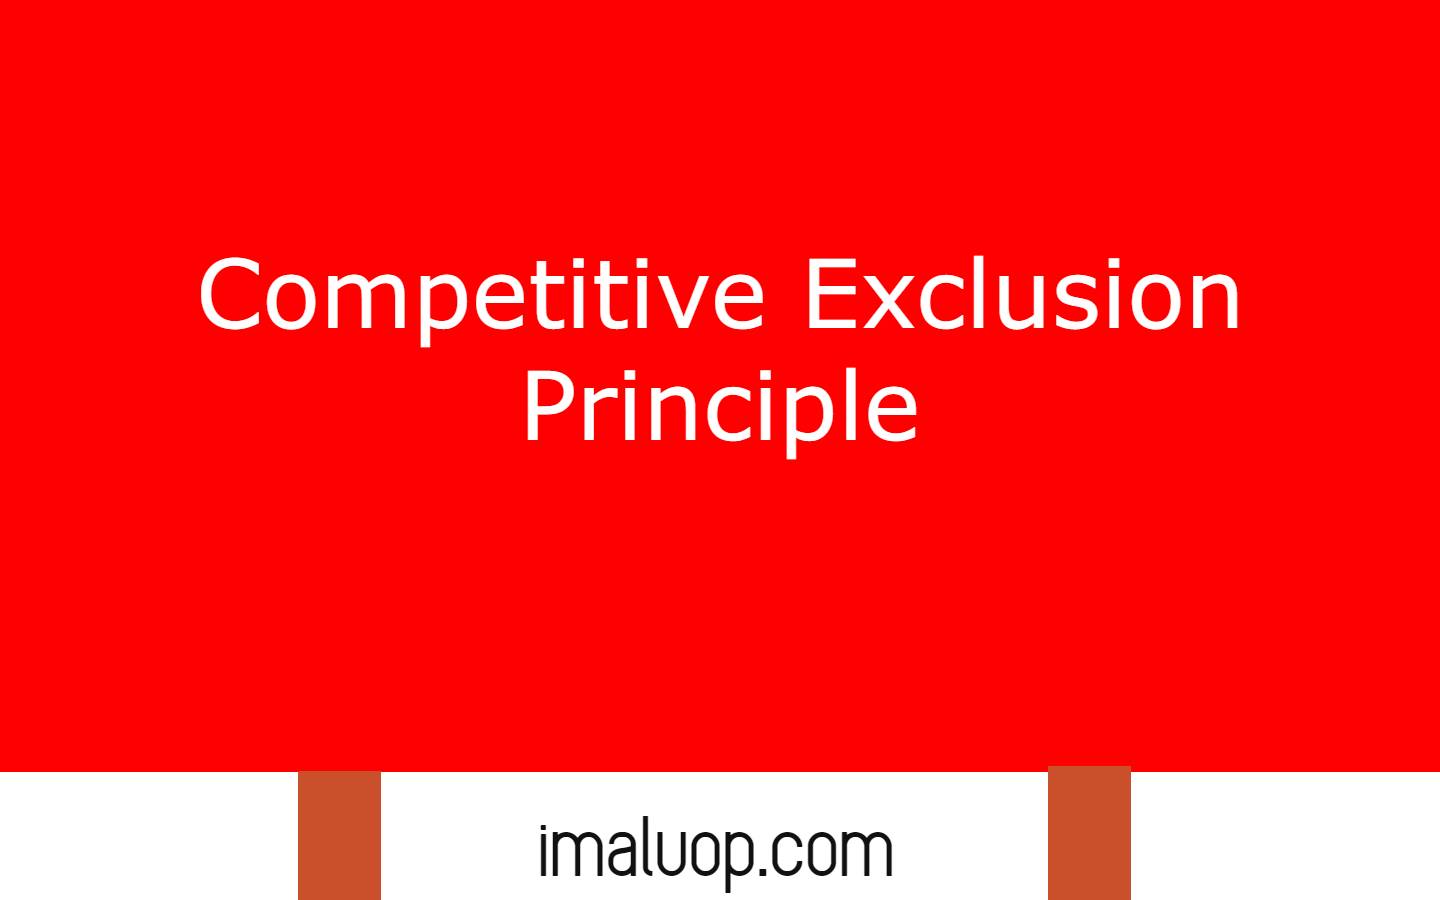 Competitive Exclusion Principle